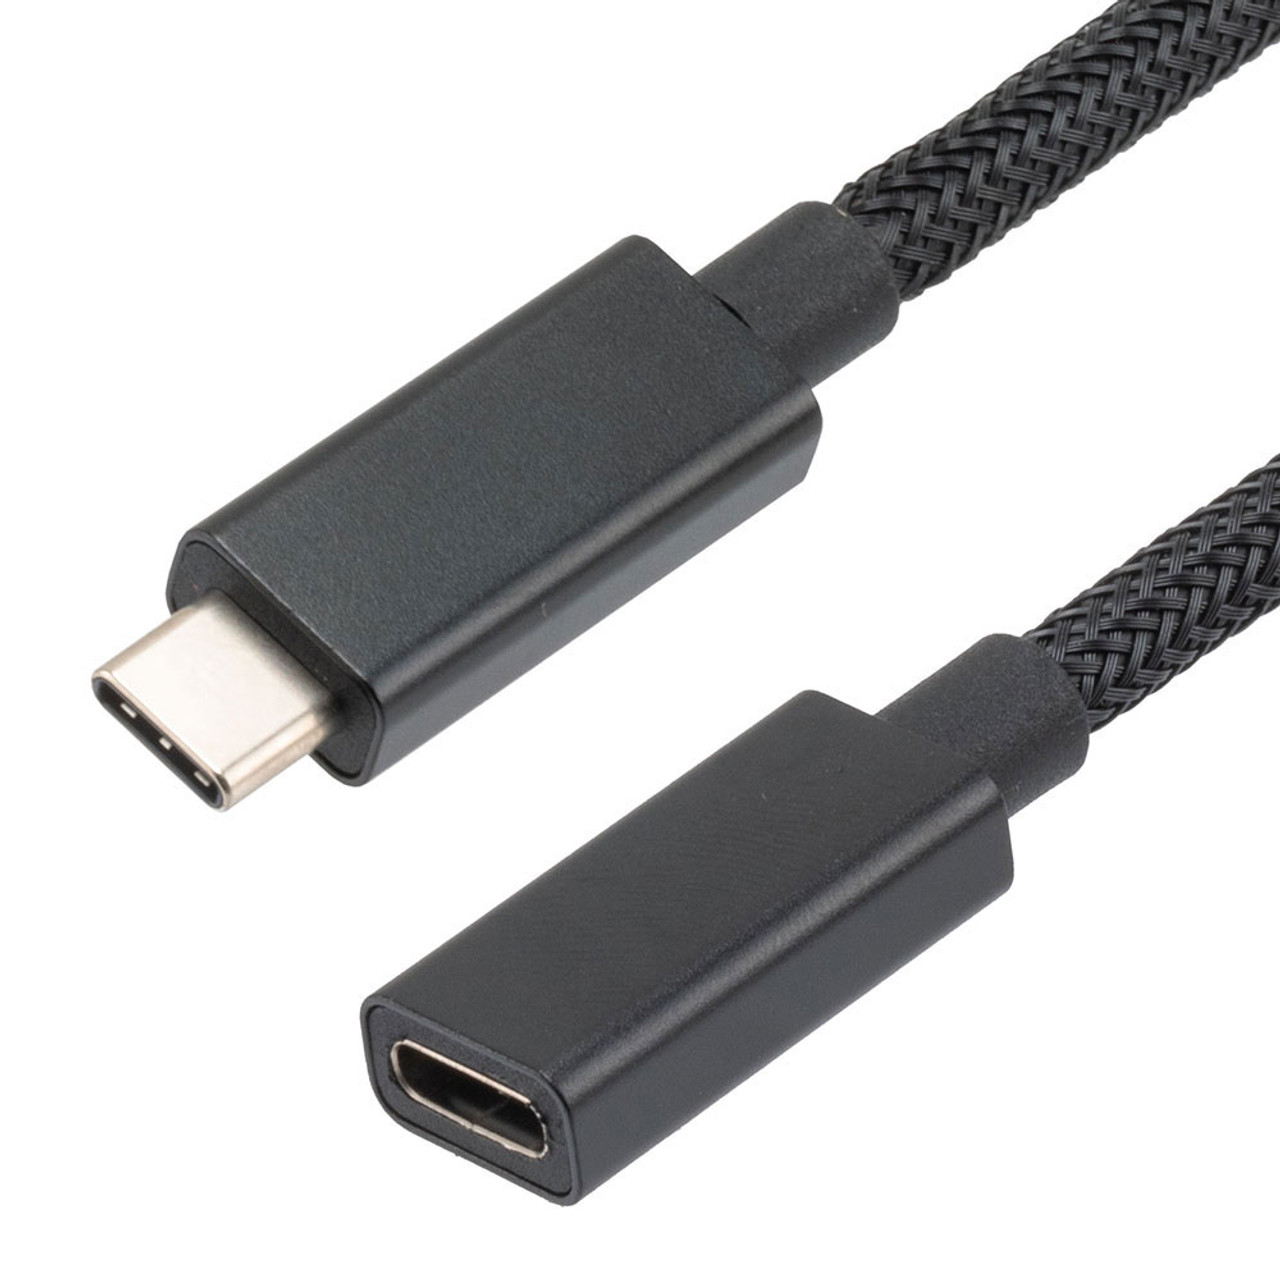 NavePoint USB C 3.1 Male to USB C 3.1 Female Cable, Aluminum Shell, Supports 20 Volts/5 Amps, 5 Gbps, Black Nylon Braid, 1M Length